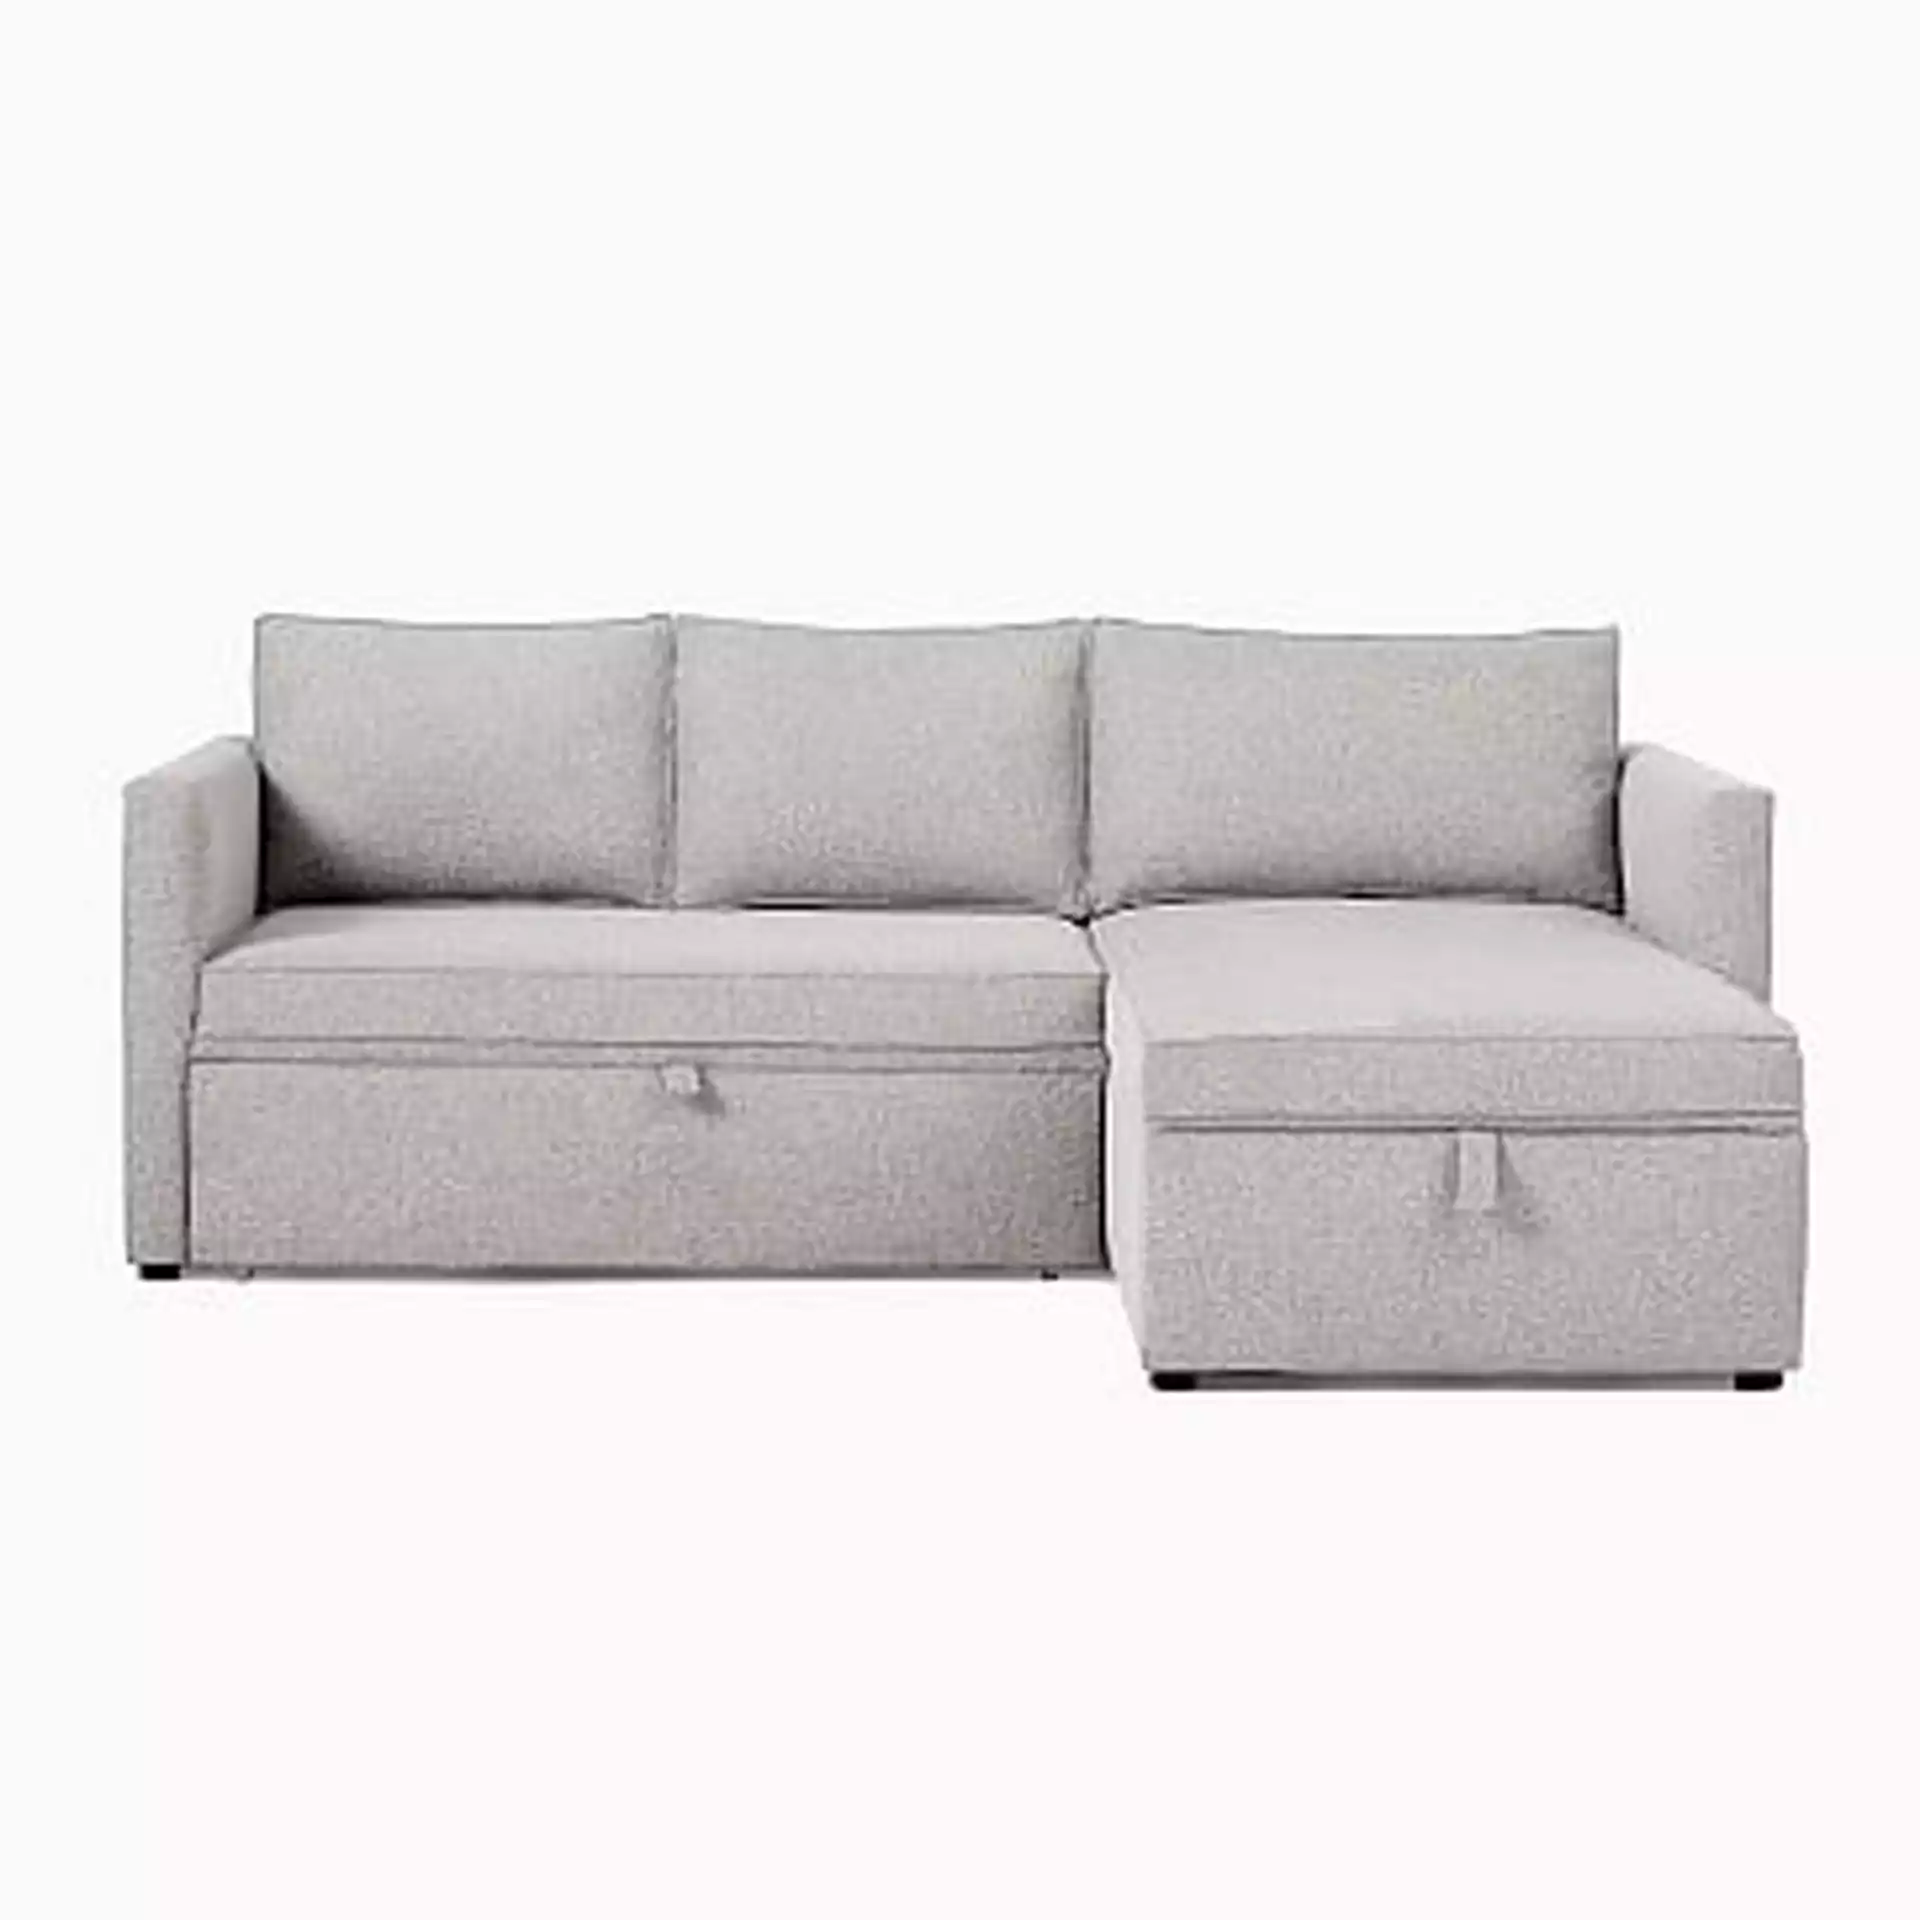 Harris Set 43: RA Pop-Up Sleeper, LA Pop-Up Storage Chaise, Poly, Twill, Sand, Concealed Supports